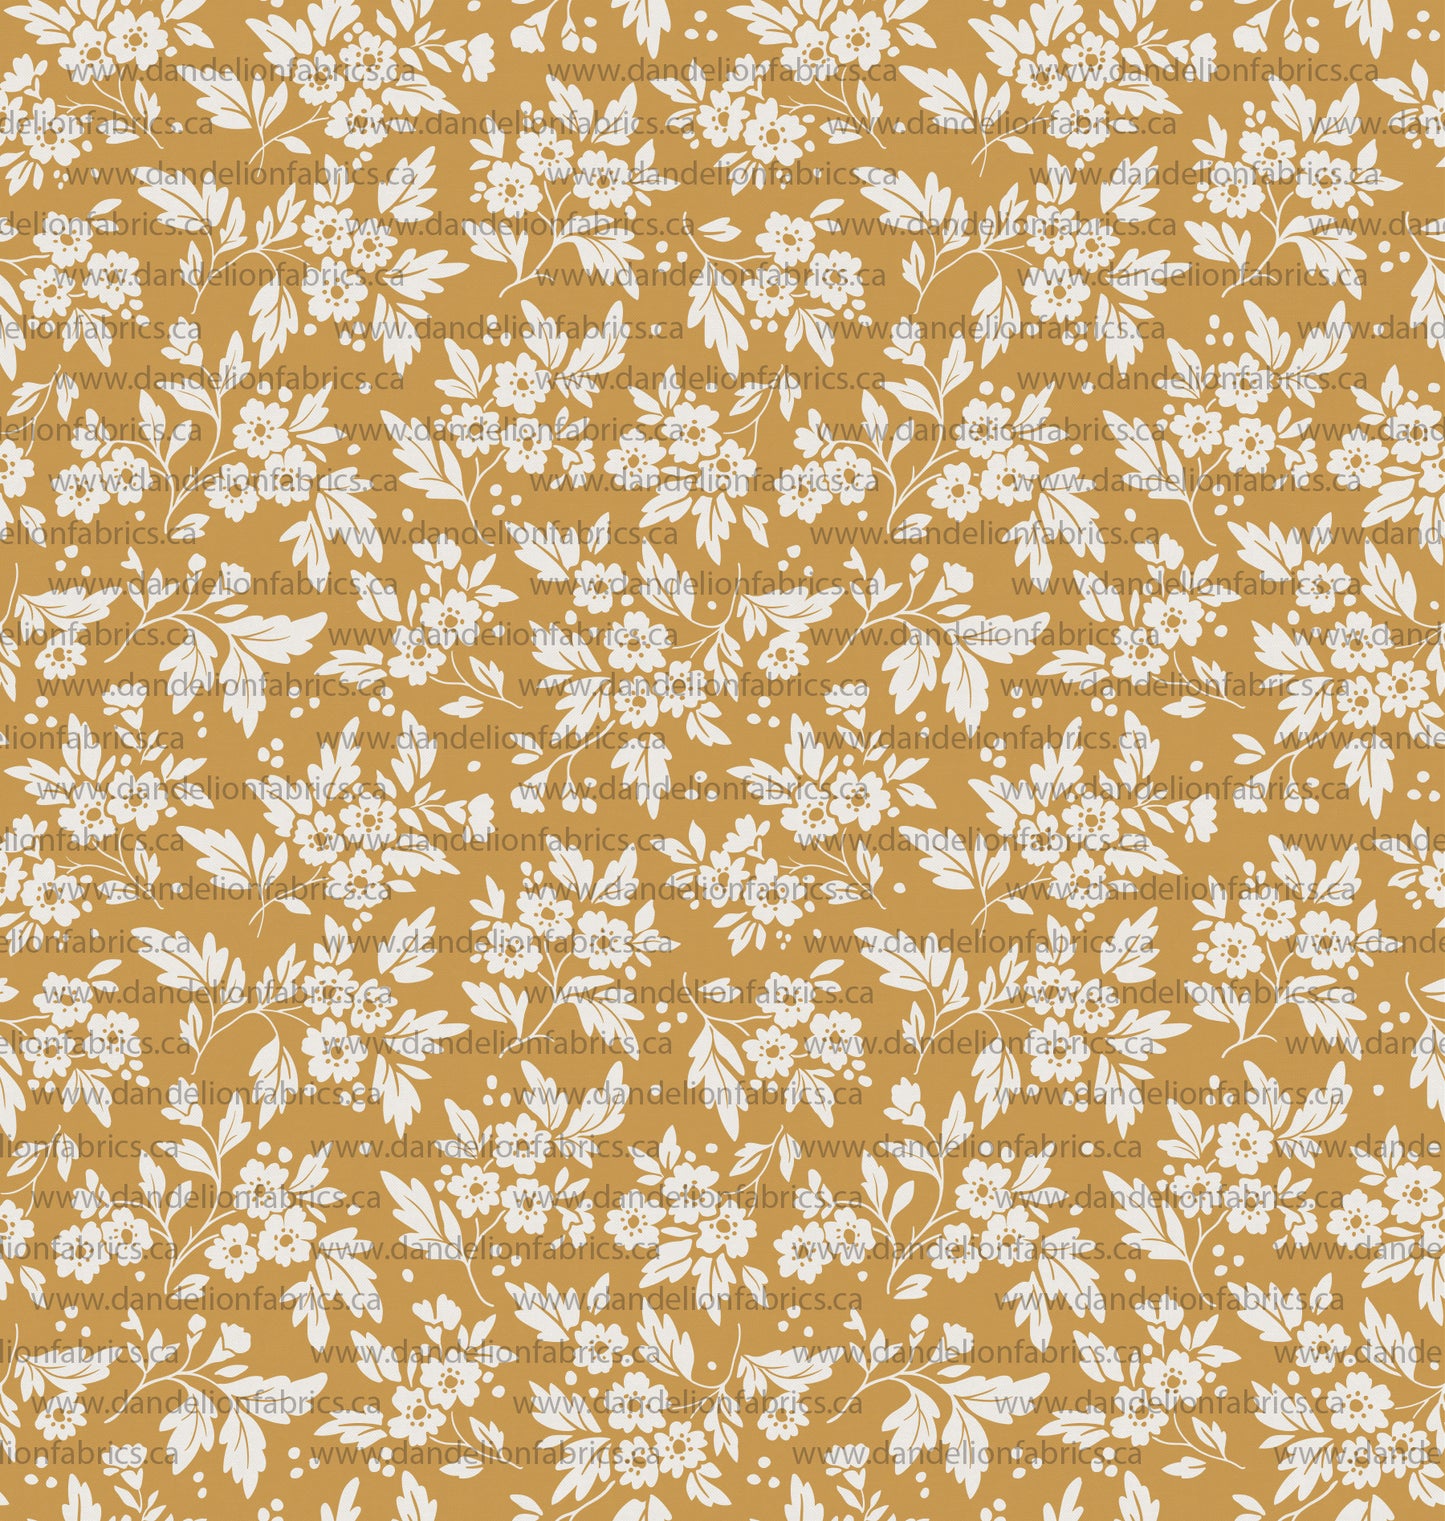 Wren Floral in Mustard Yellow | Unbrushed Rib Knit Fabric | SOLD BY THE FULL BOLT